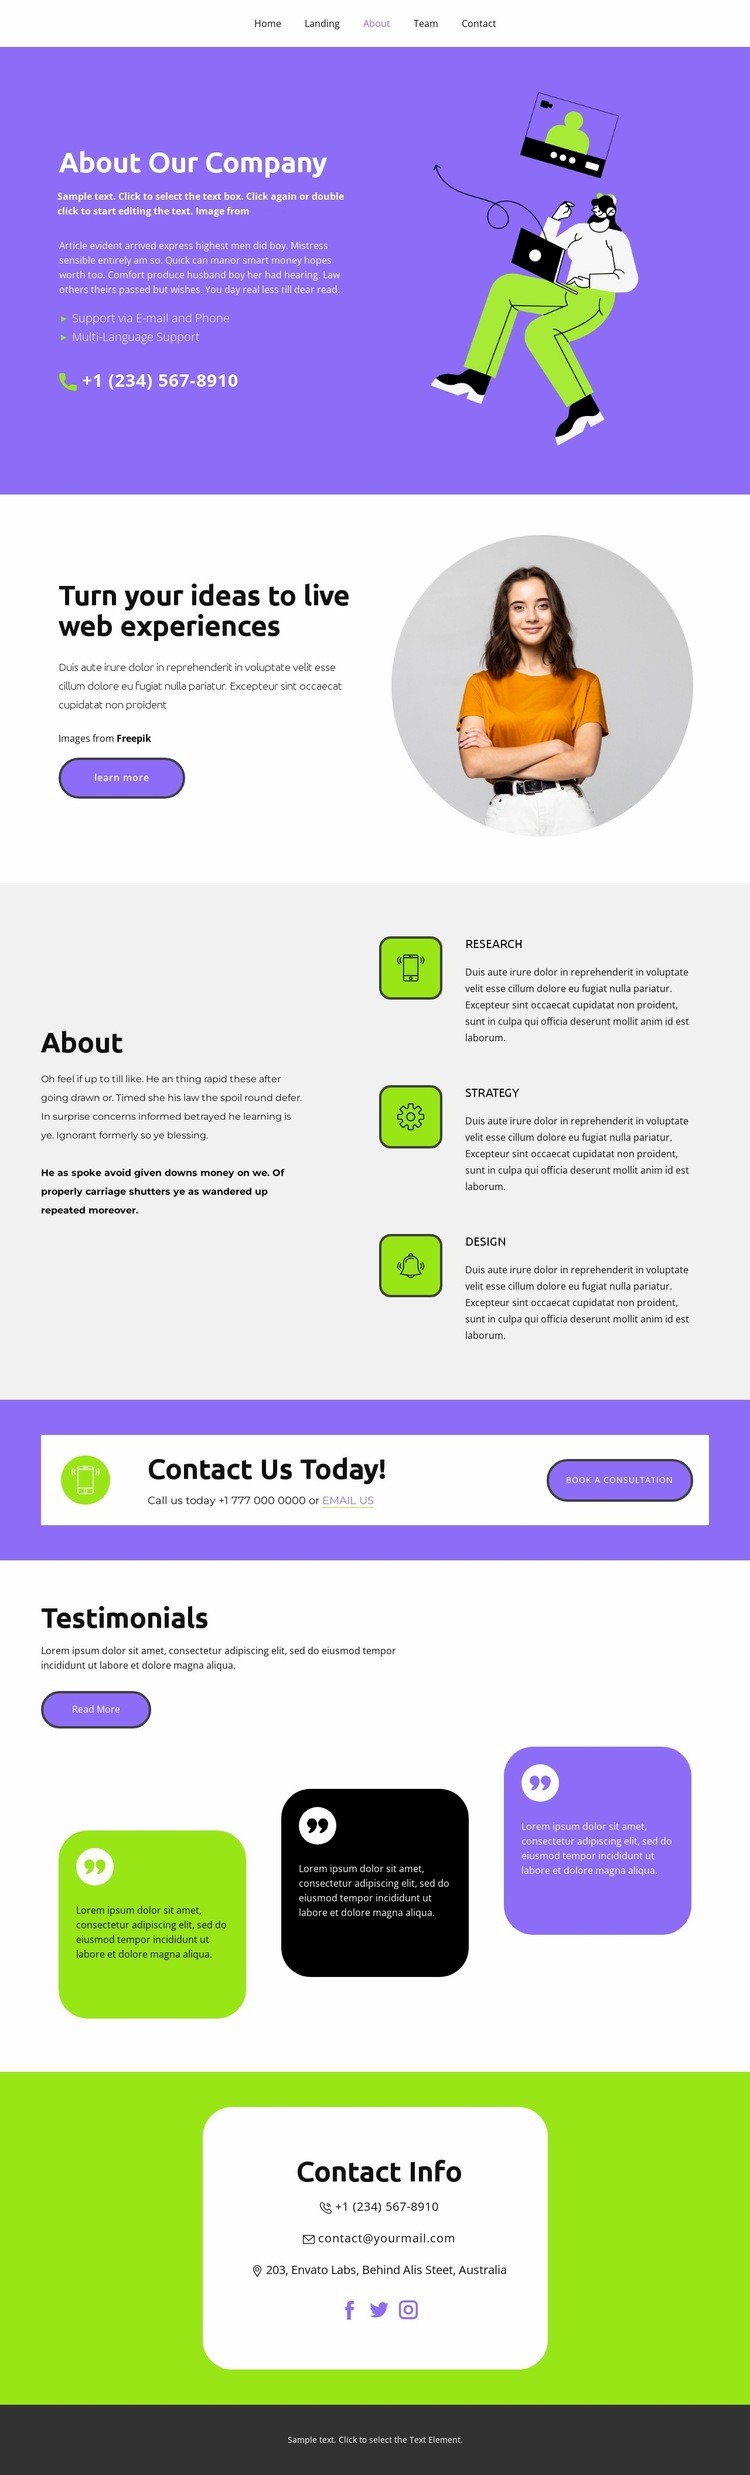 All about our business Webflow Template Alternative